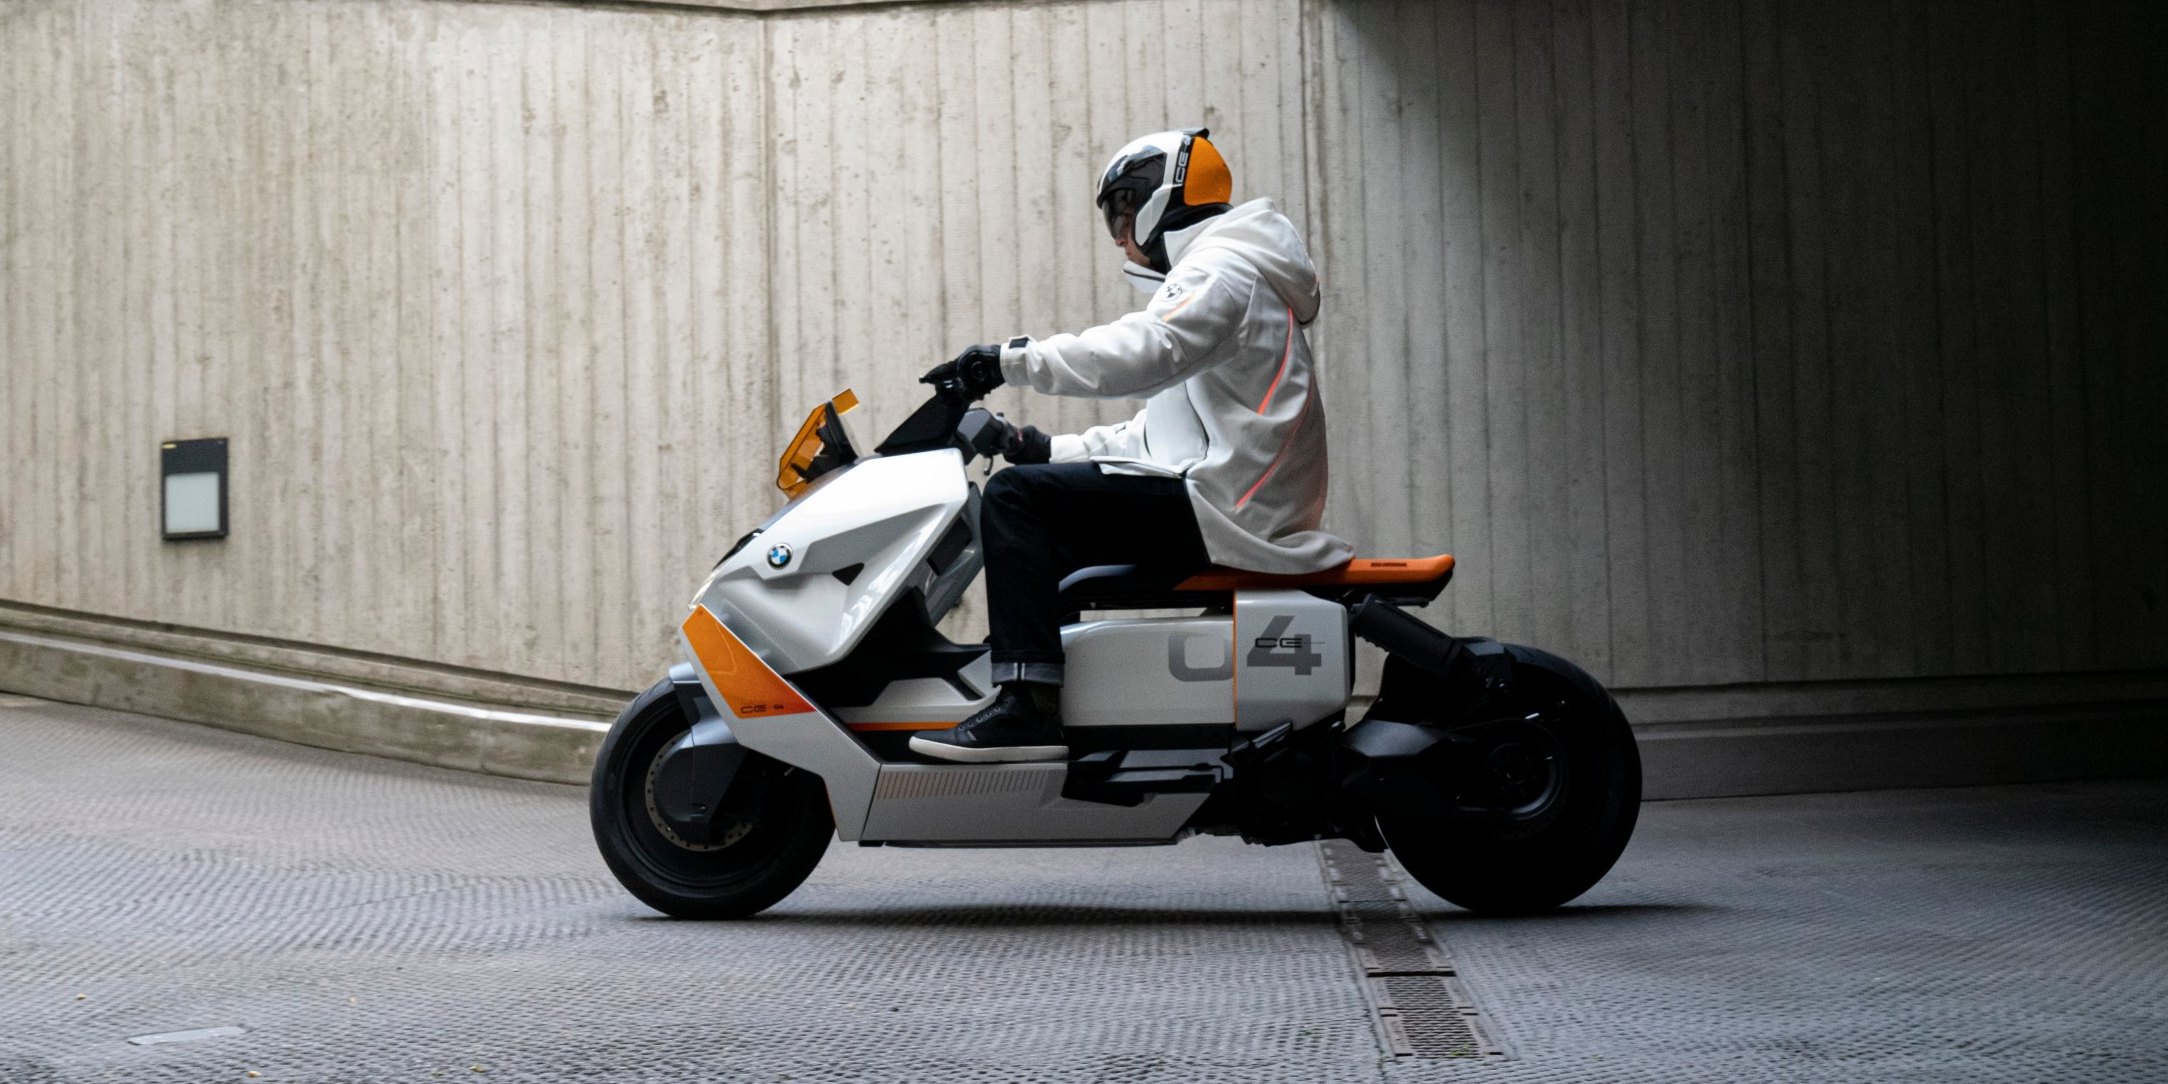 Futuristic BMW electric scooter ready for production, design filings